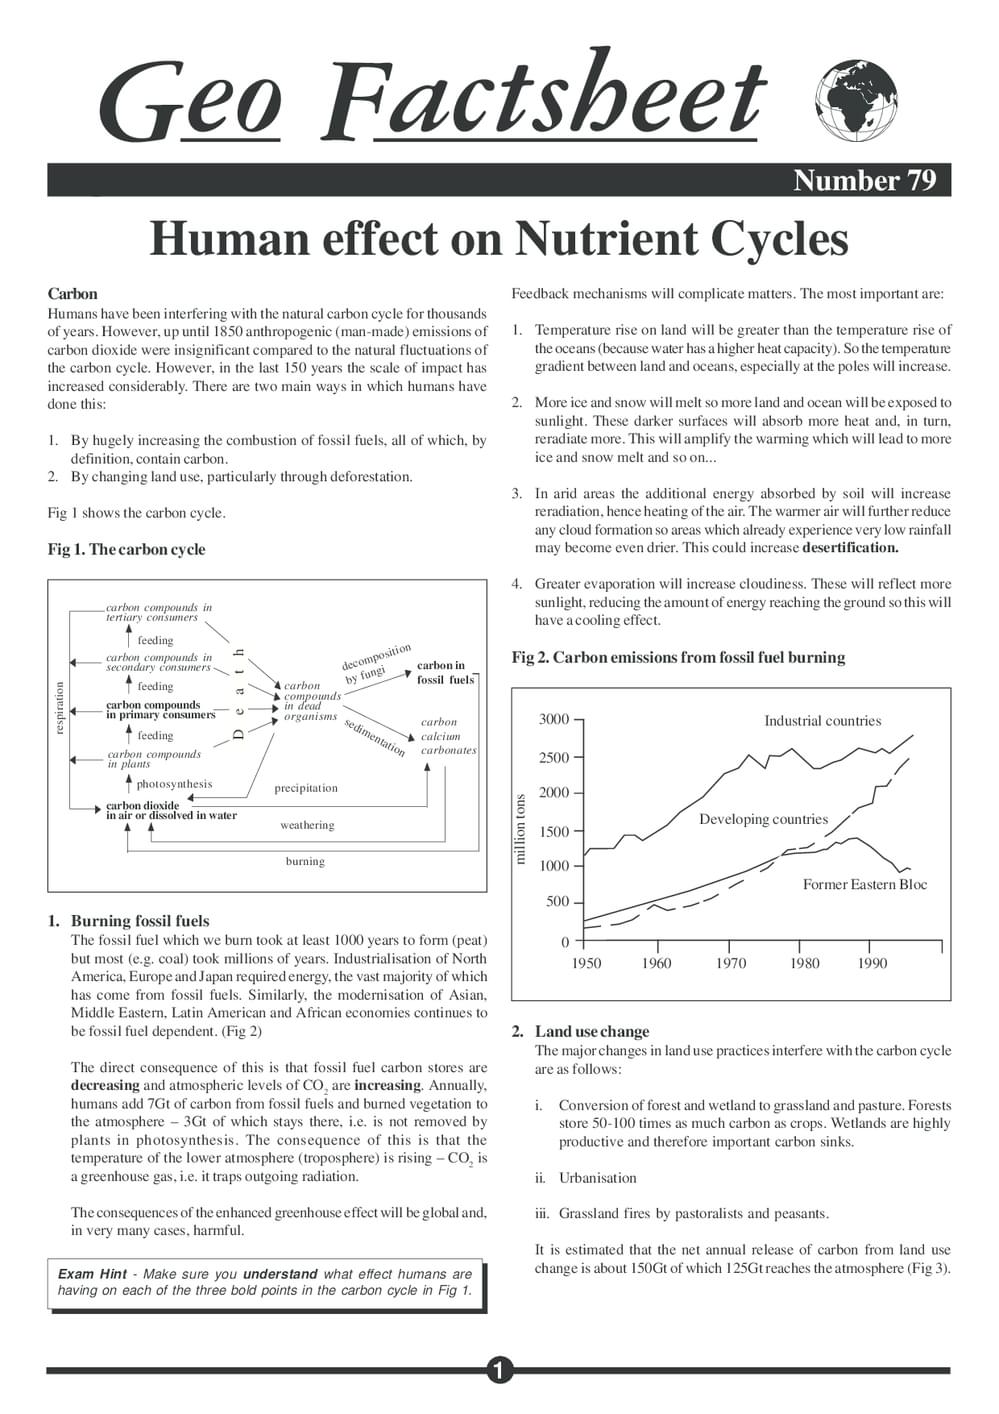 079 Human Effect Nutrient Cycles